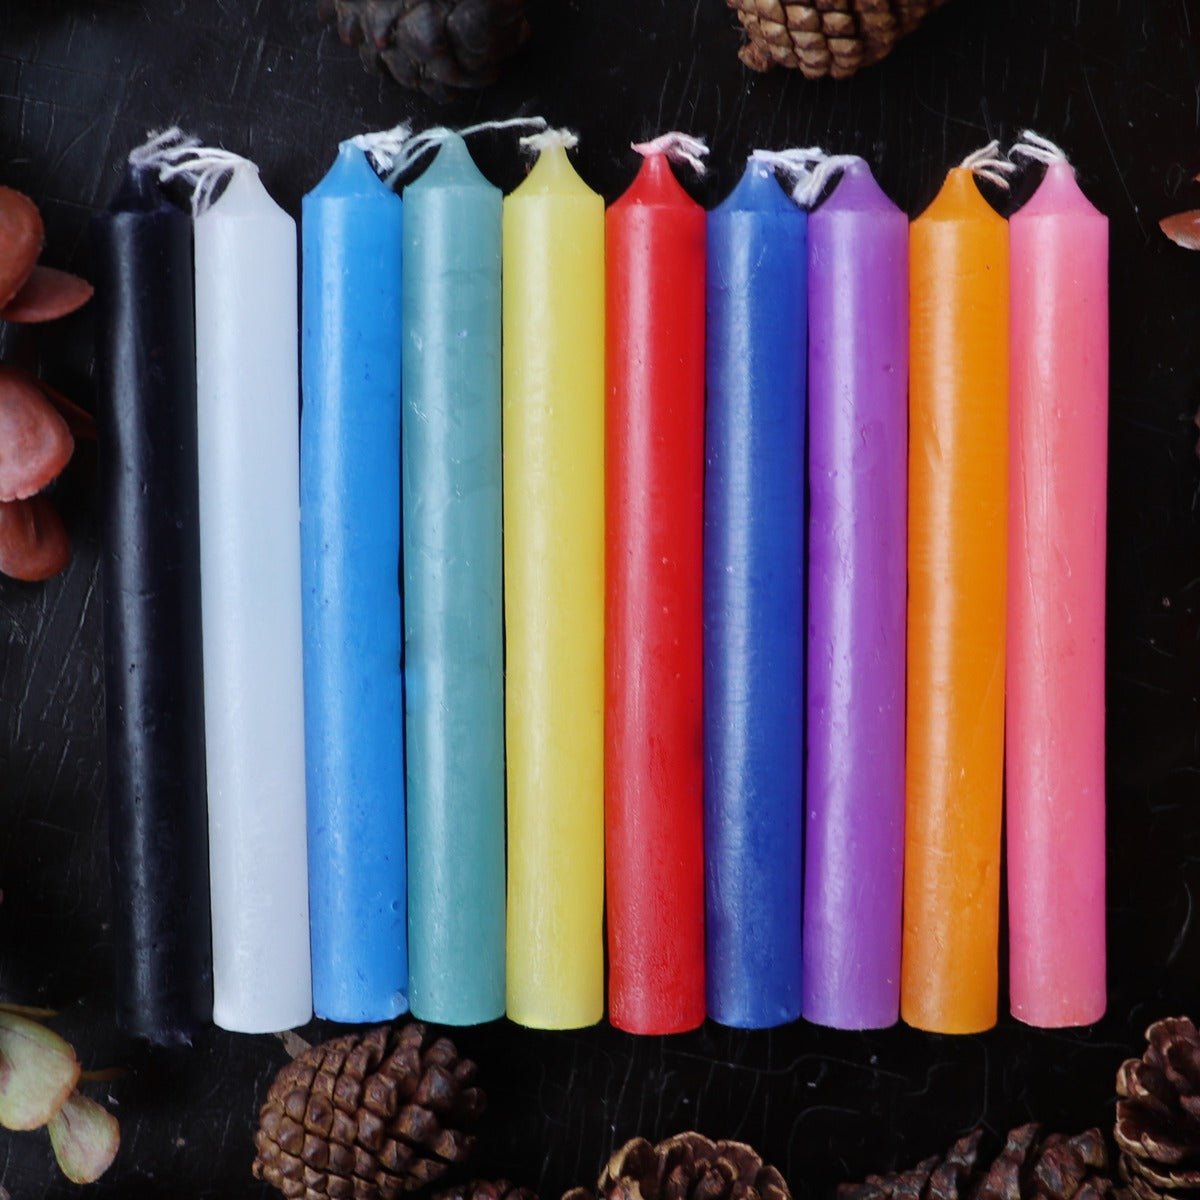 20 Candle Set, 10 colors - 13 Moons